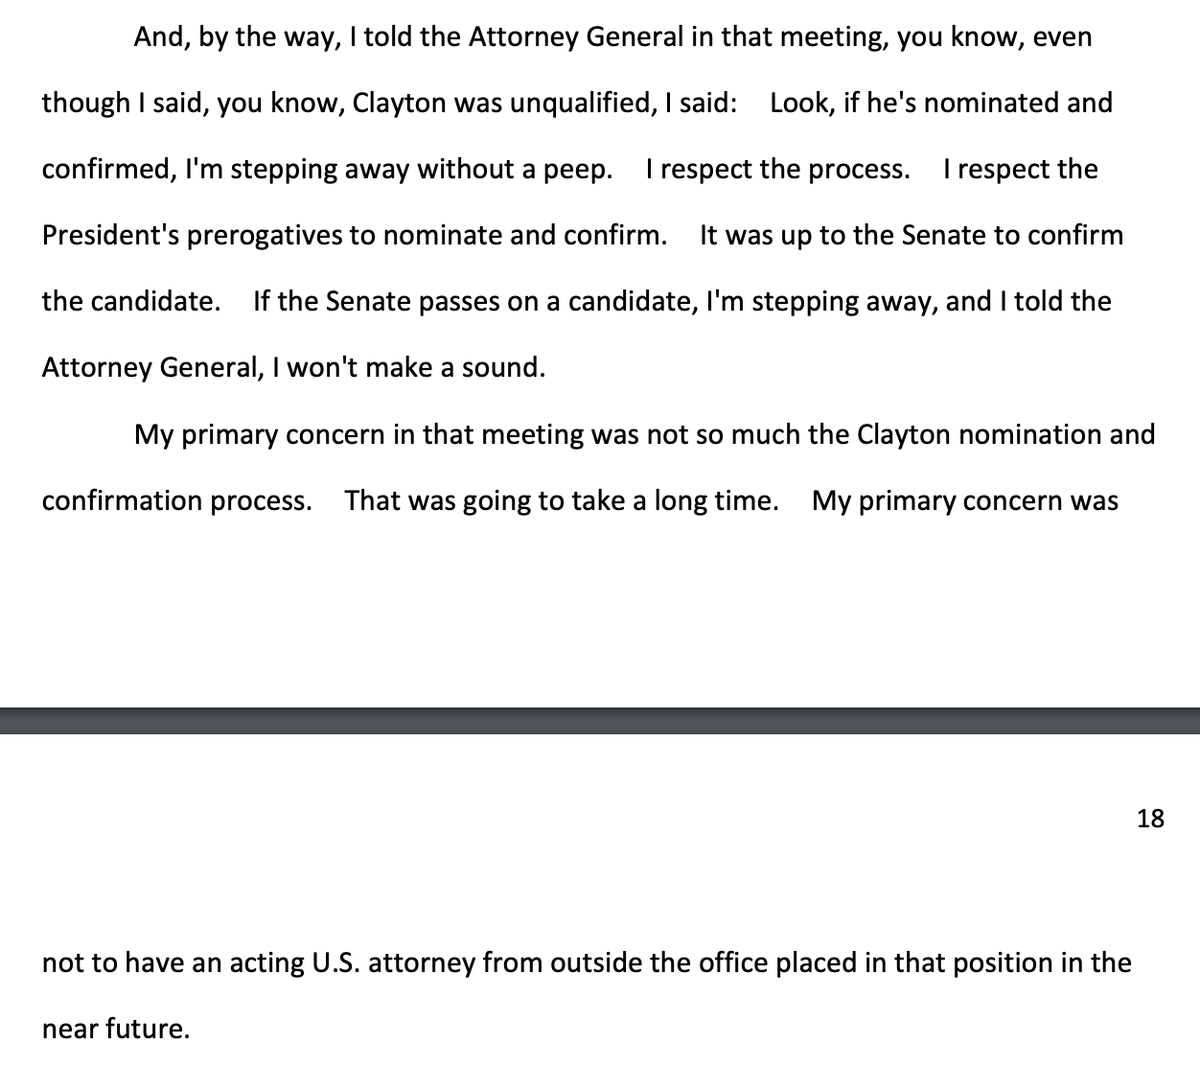 Berman was willing to go if Clayton went through confirmation bc that would give ... enough time.